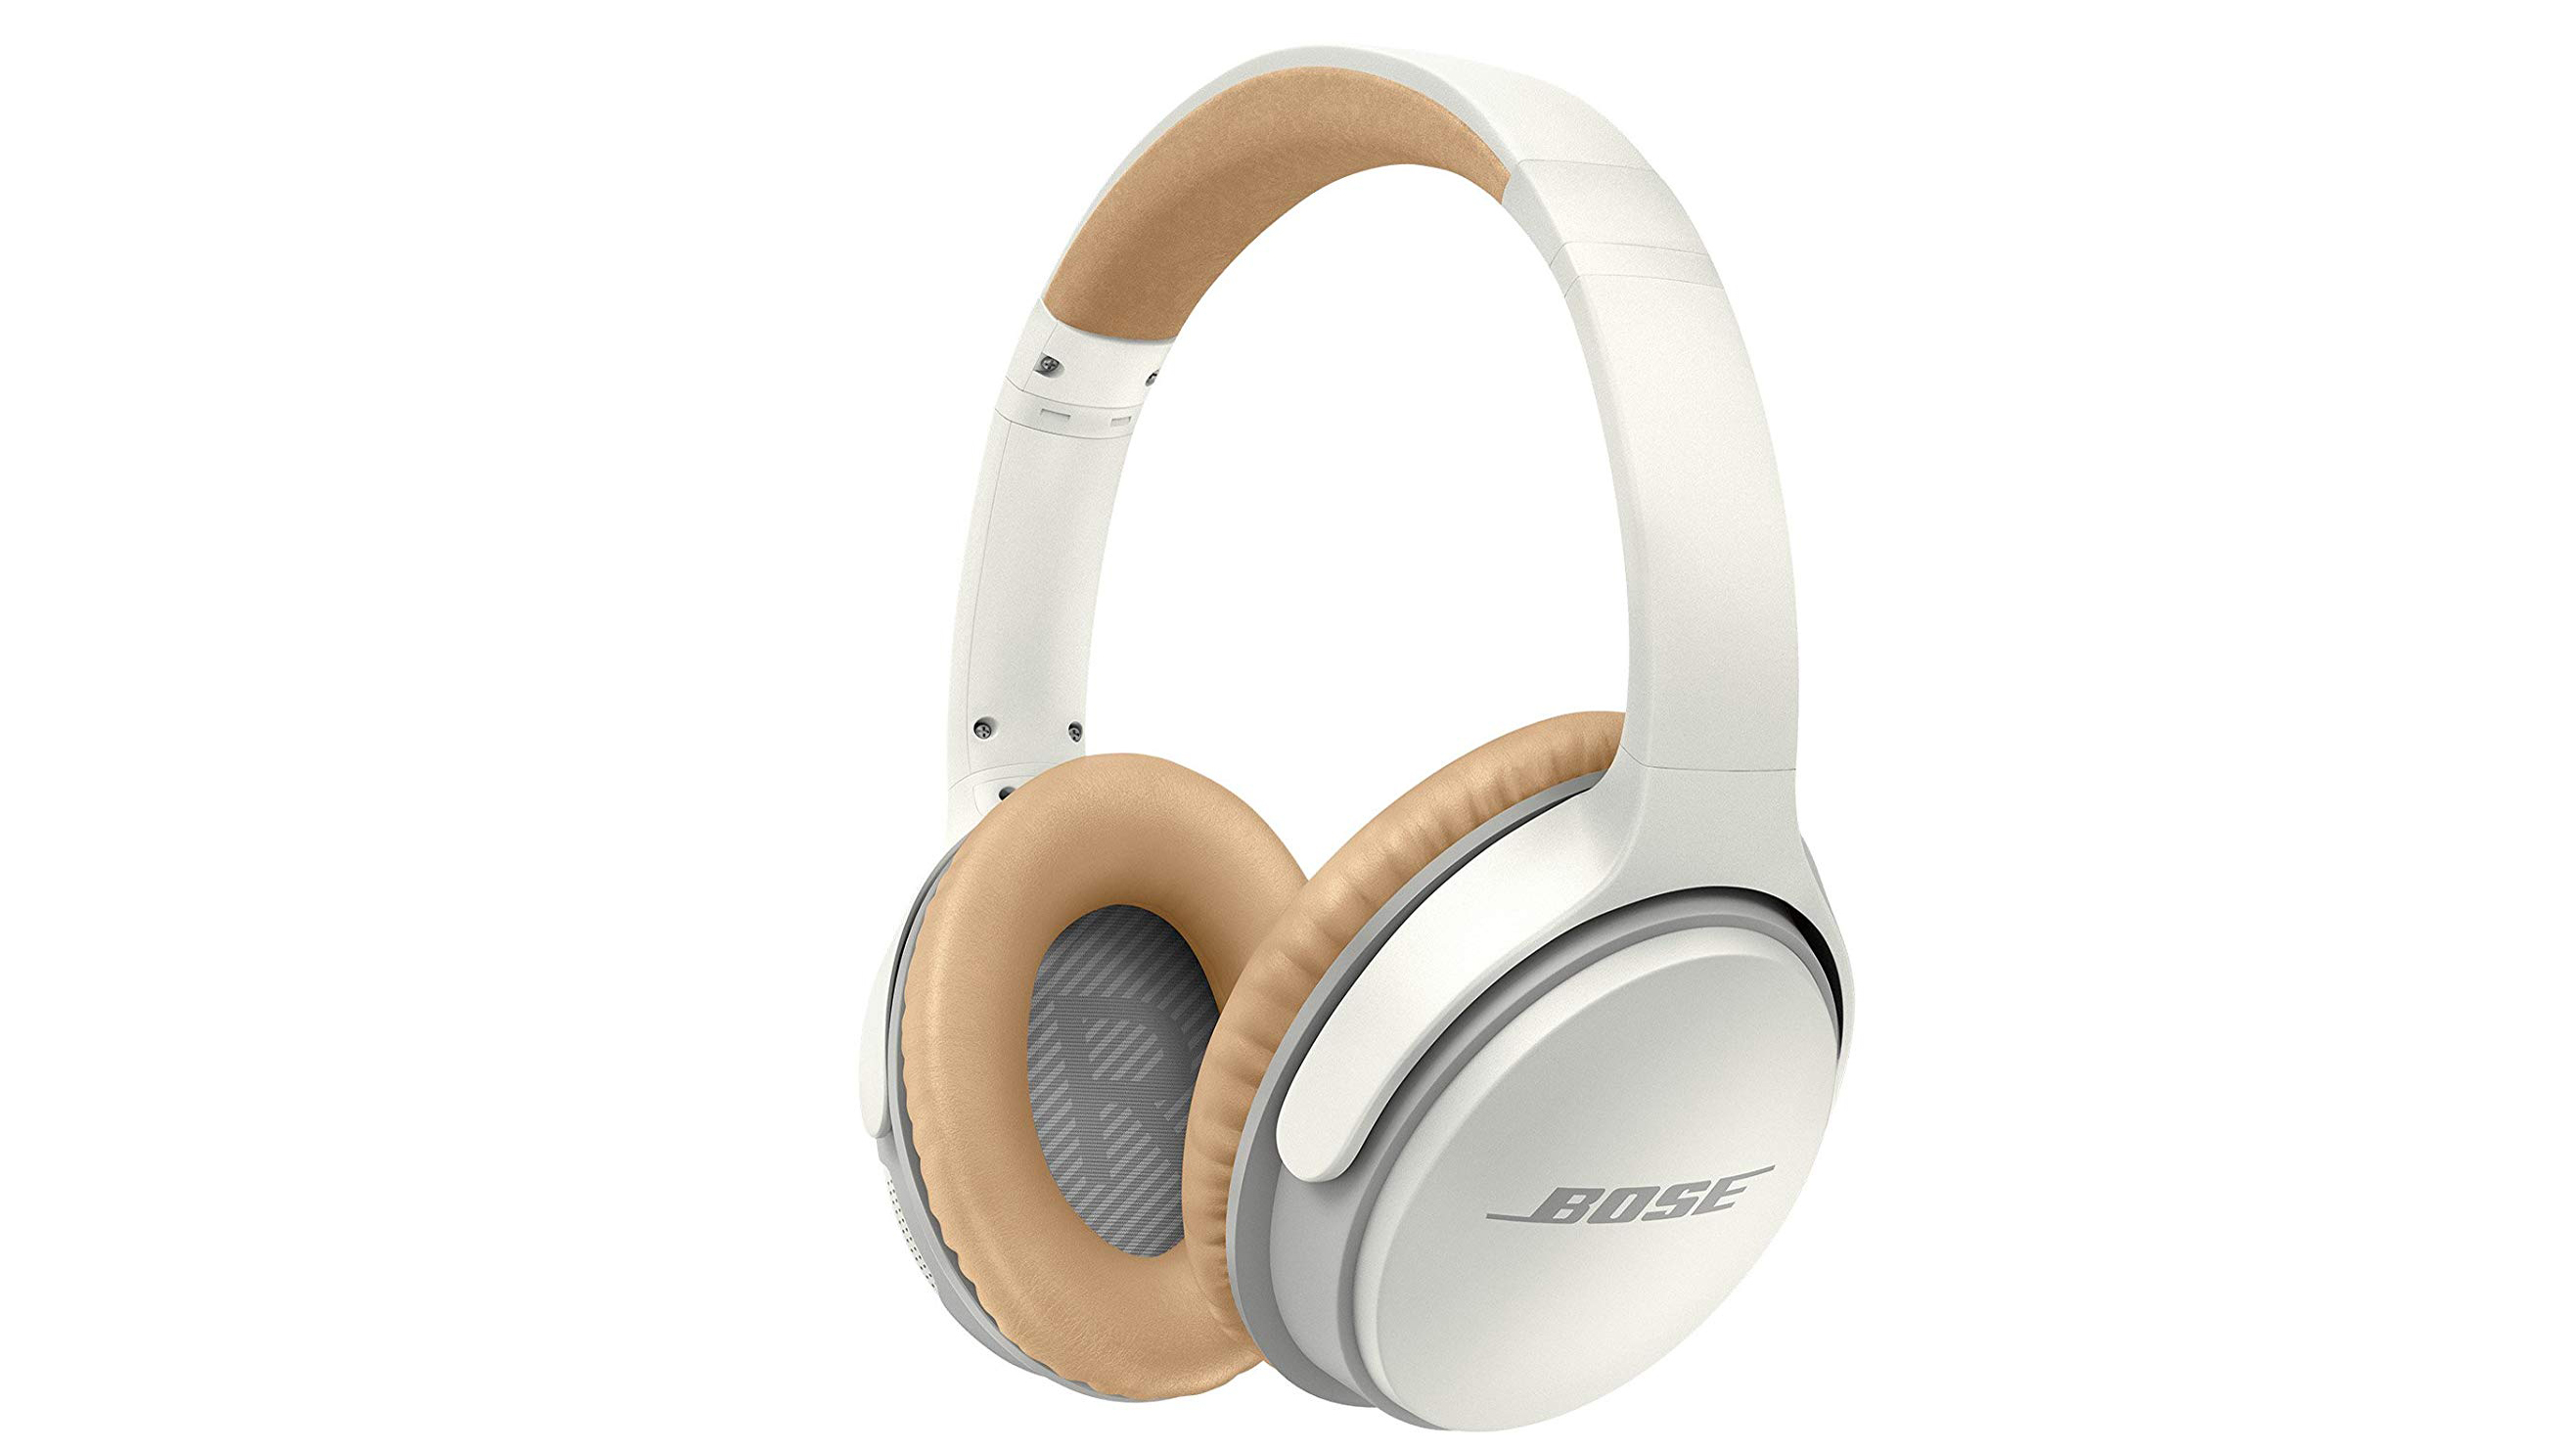 Prime Day deal: Save £75 on Bose SoundLink II wireless headphones